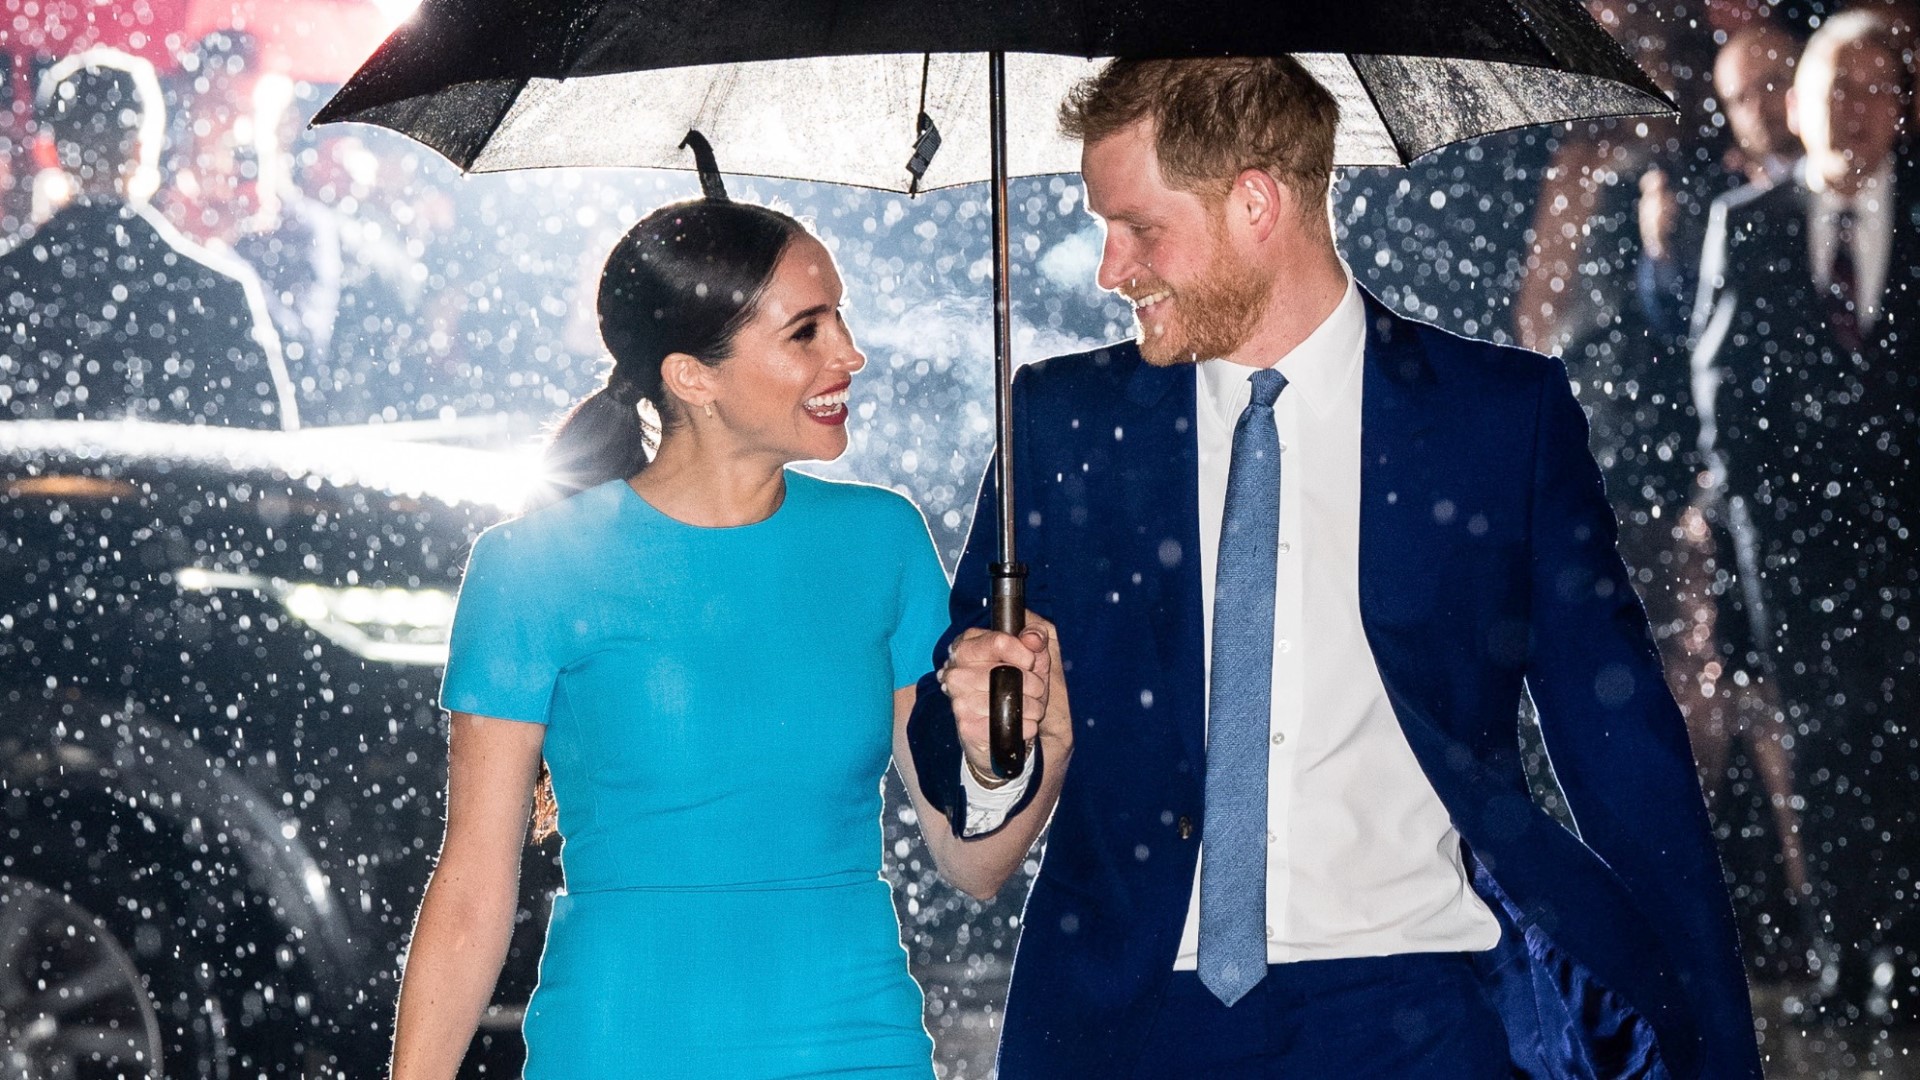 It's been nearly a year since Meghan Markle and Prince Harry announced they were taking a step back from royal life on January 8, 2020. Here's a look at some of their most memorable moments since leaving. Buzz60's Johana Restrepo has more.